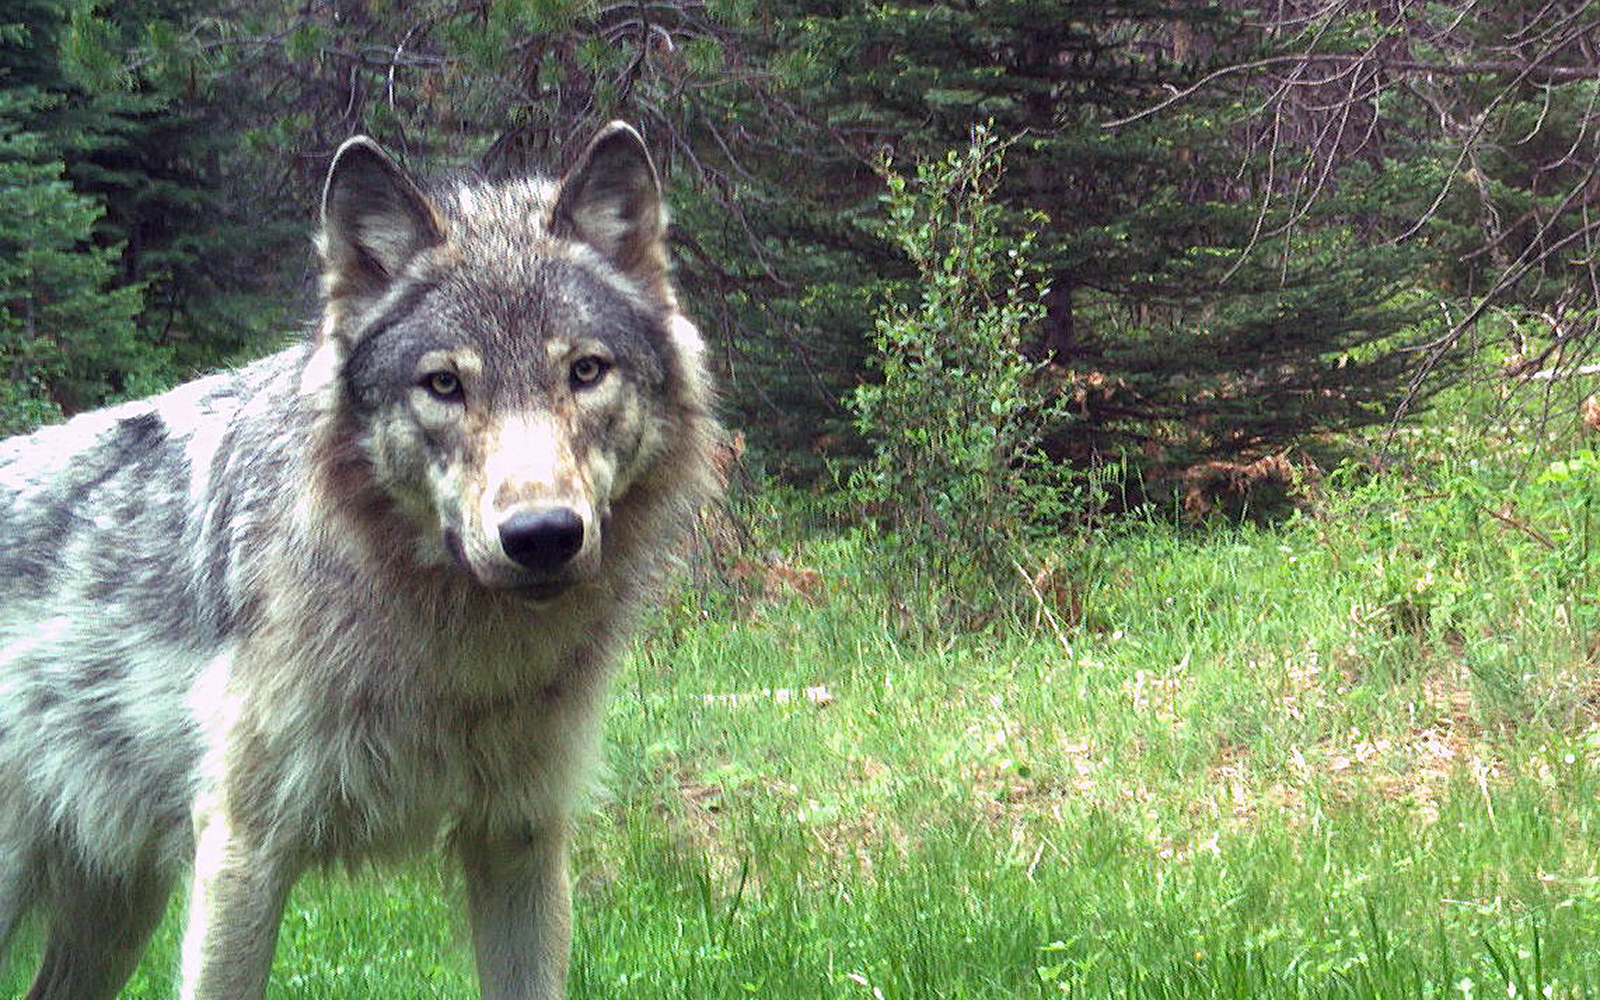 Press Release: 2021 Worst Year for Oregon’s Wolf Population Growth Since Return